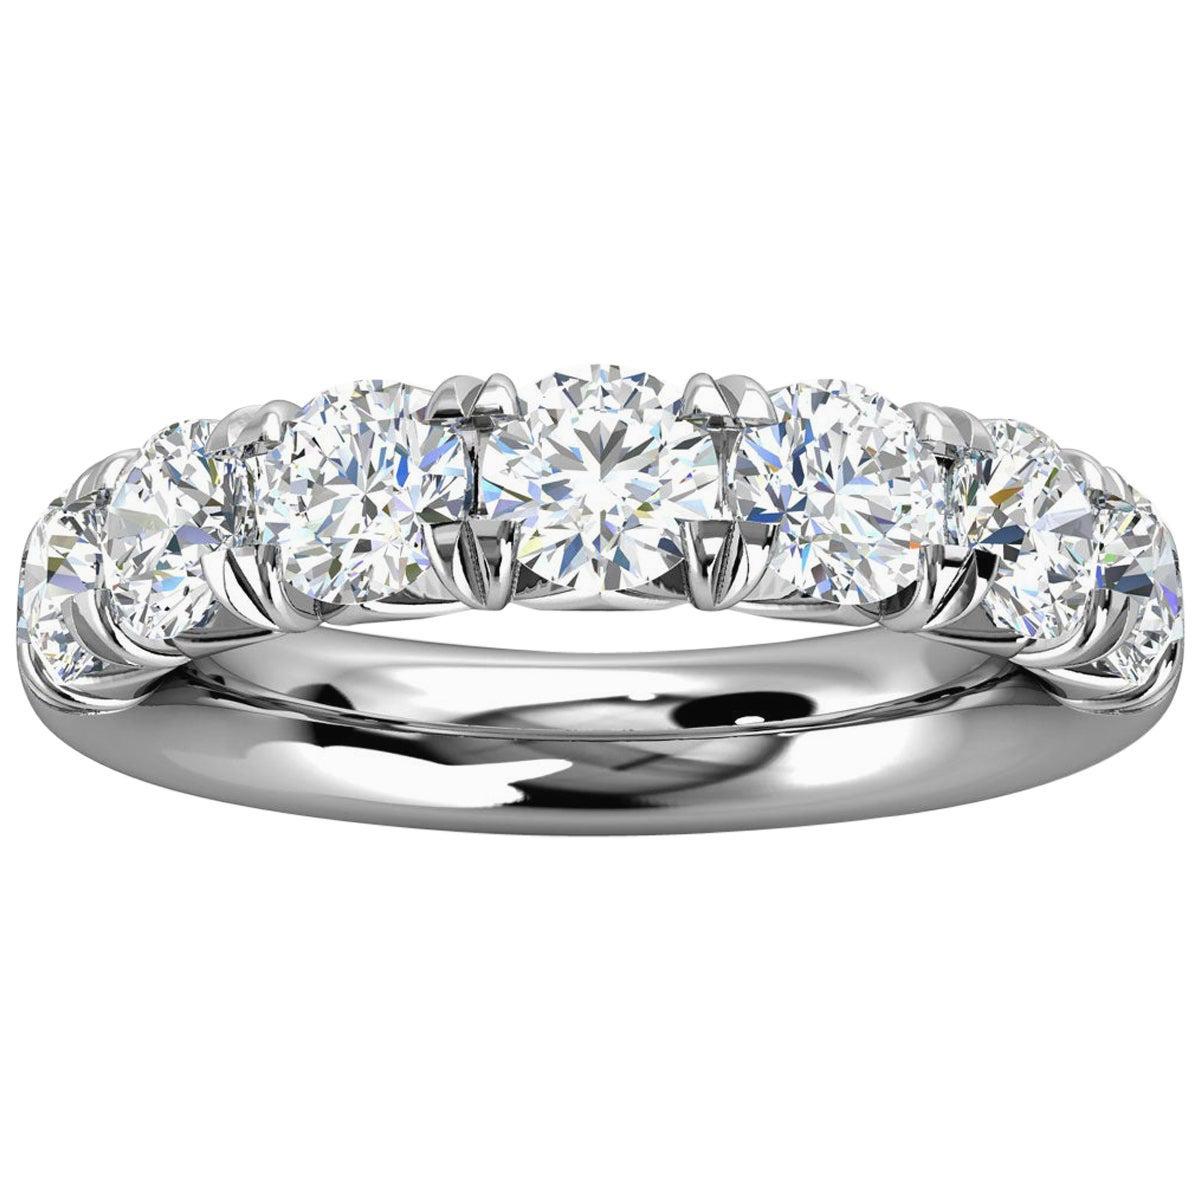 For Sale:  Platinum Voyage French Pave Diamond Ring '2 Ct. tw'